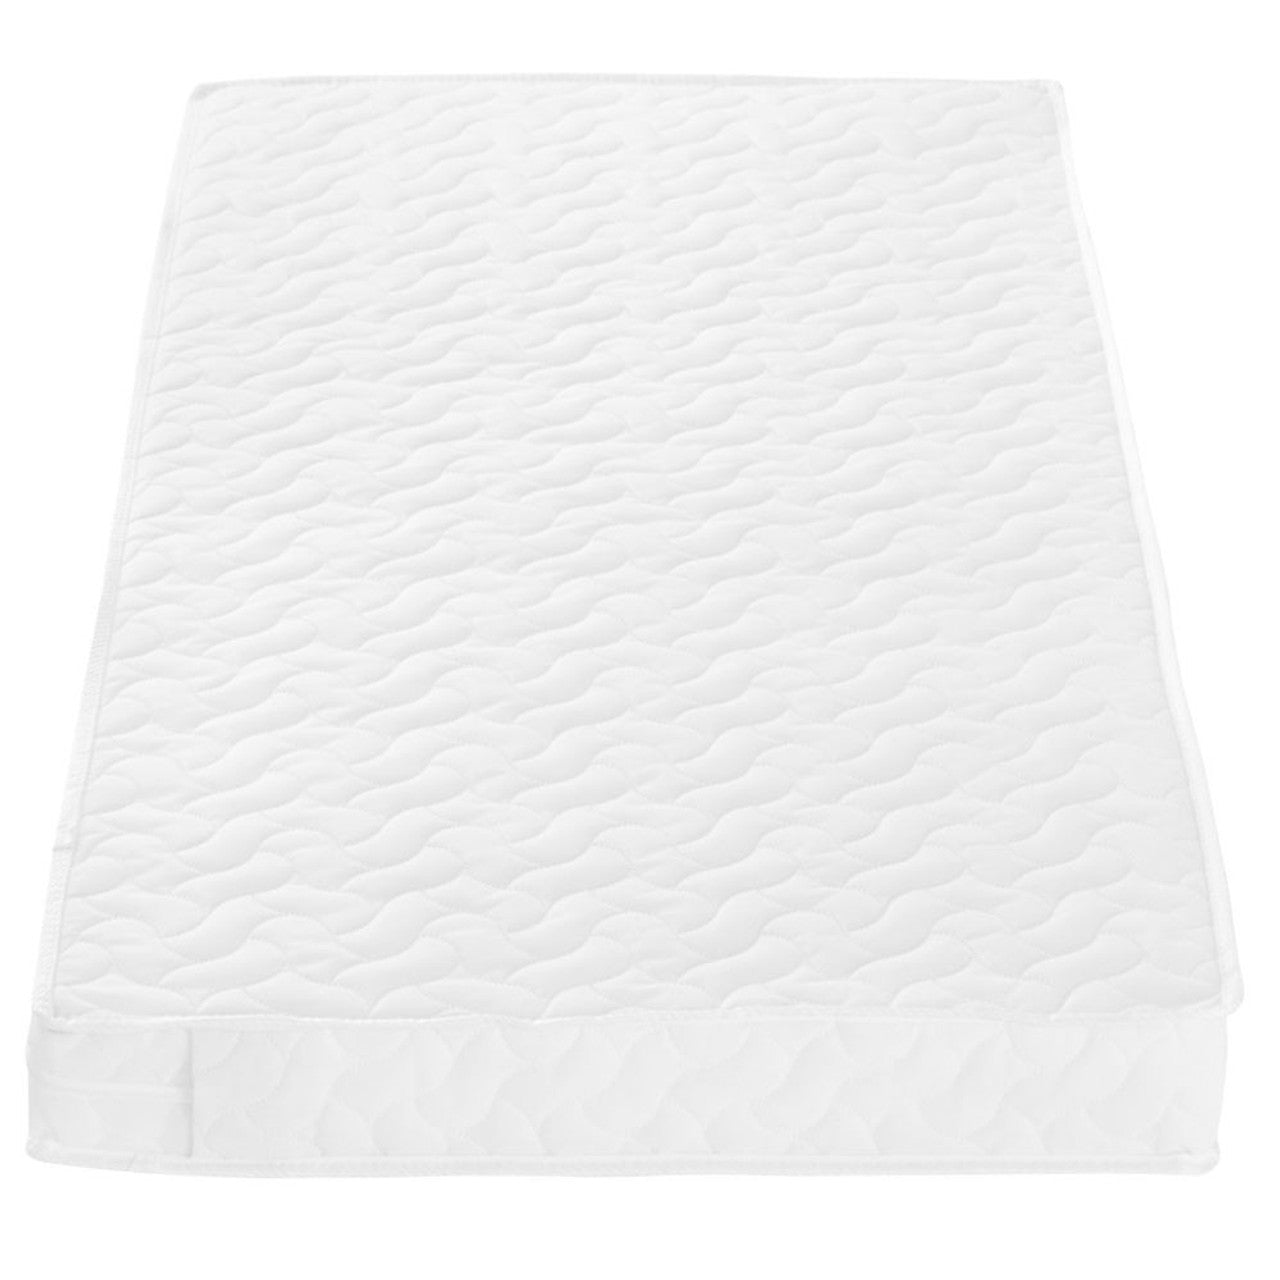 Tutti Bambini Pocket Sprung Cot Bed Mattress (70 x 140 cm) - For Your Little One